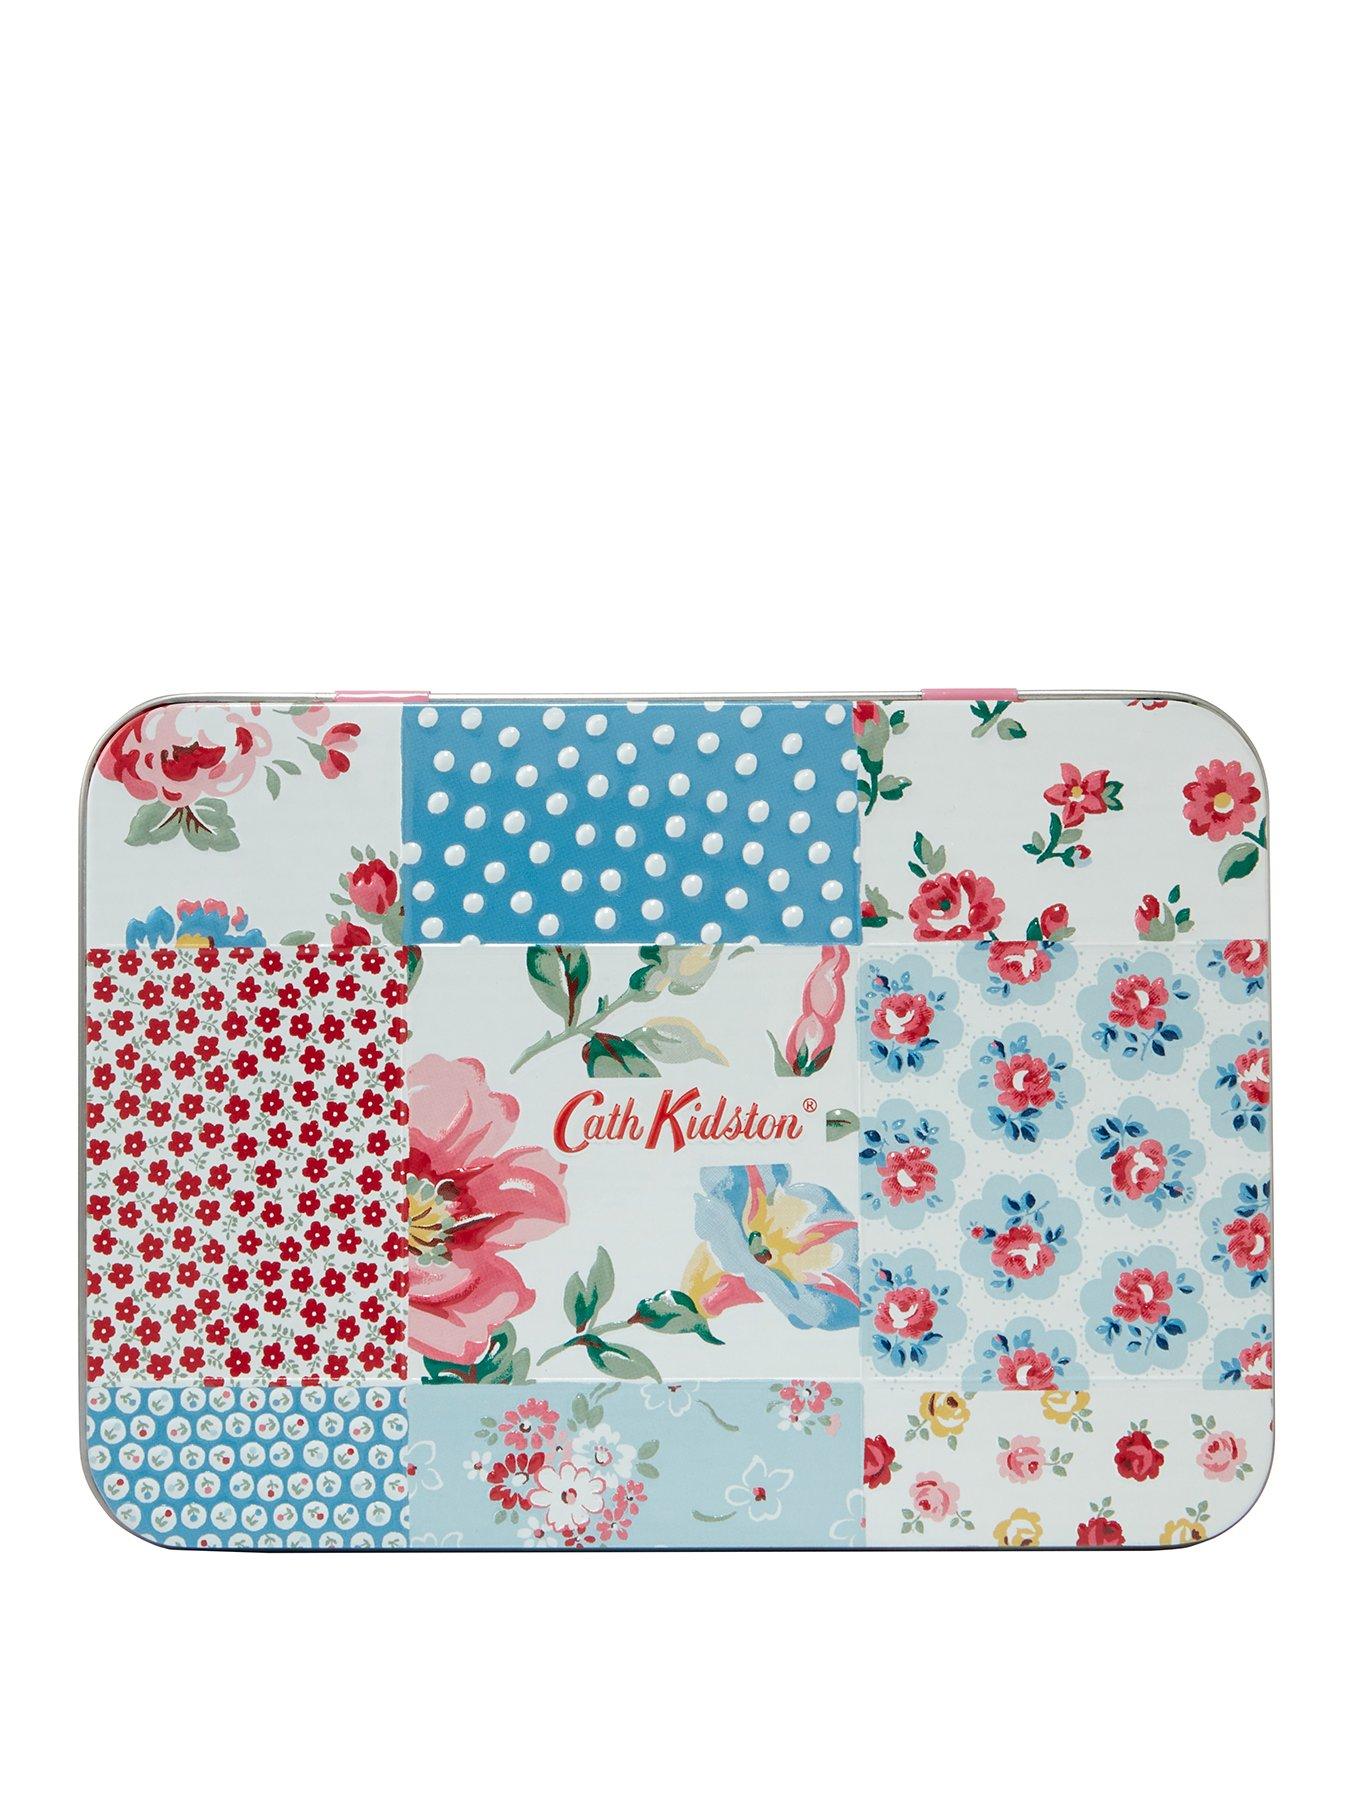 cath kidston gifts for her